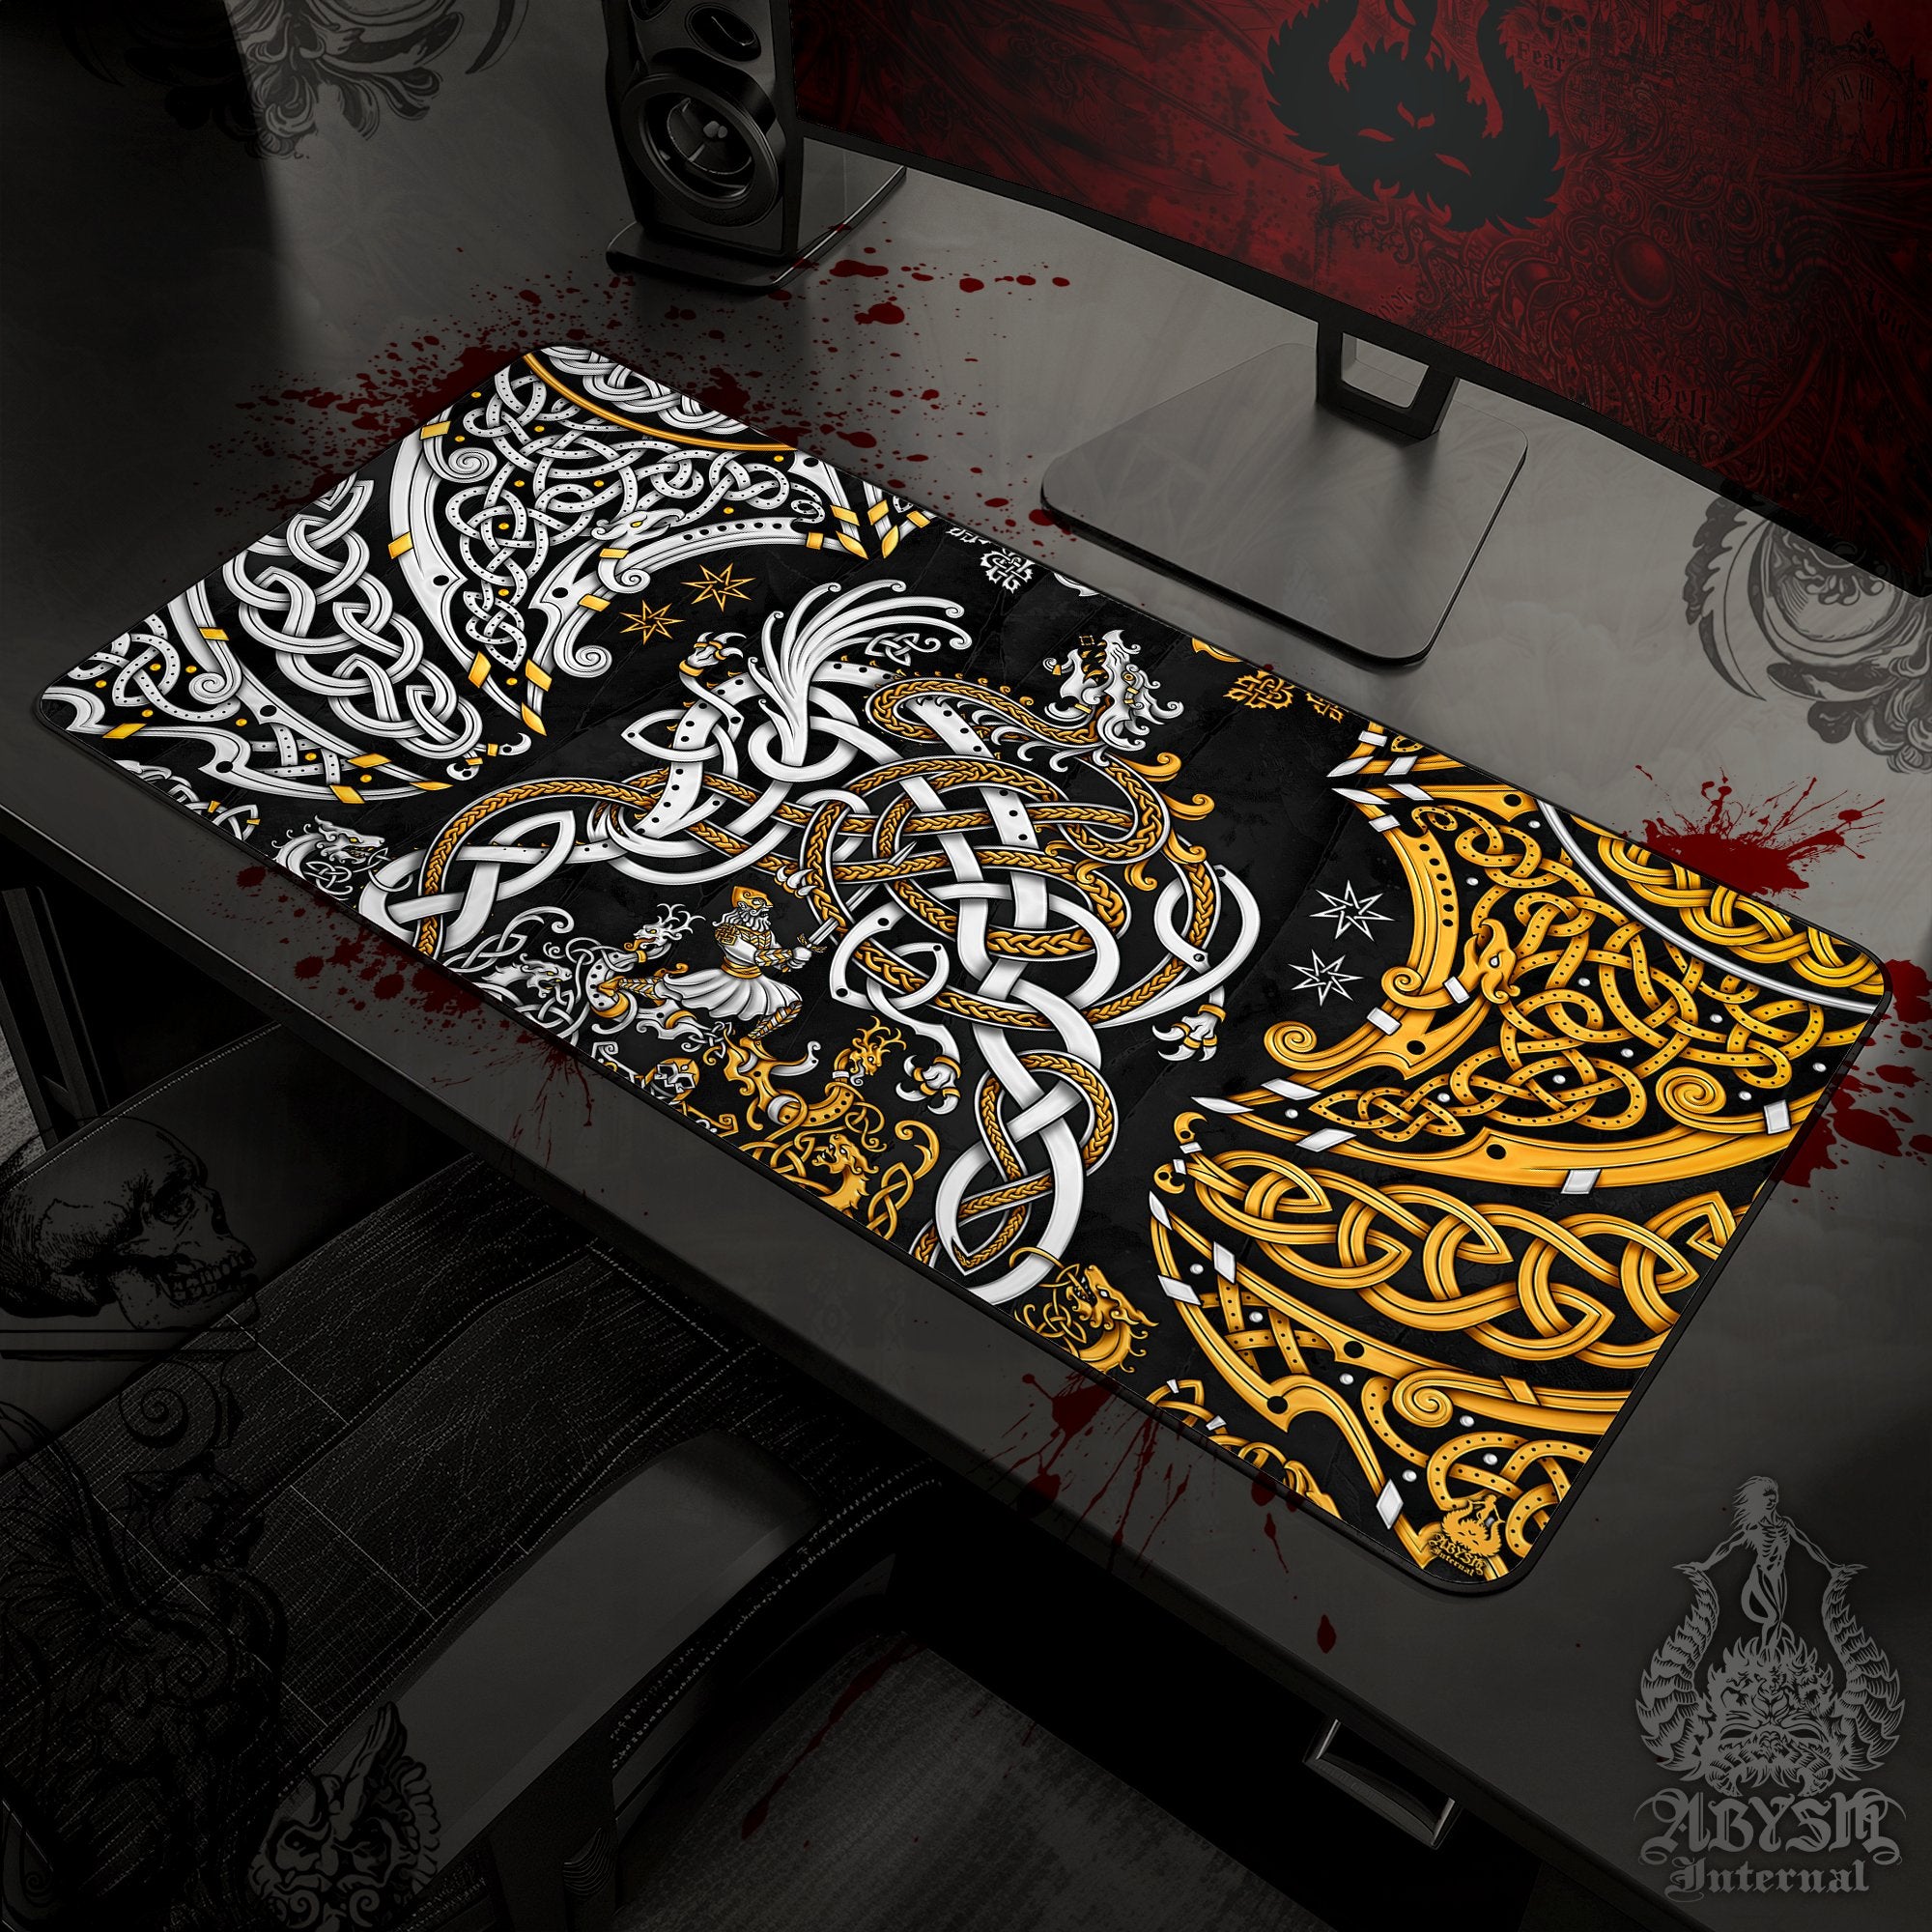 Viking Desk Mat, Norse Dragon Gaming Mouse Pad, Nordic Knotwork Table Protector Cover, Fafnir Workpad, Art Print - Gold, 3 Colors - Abysm Internal